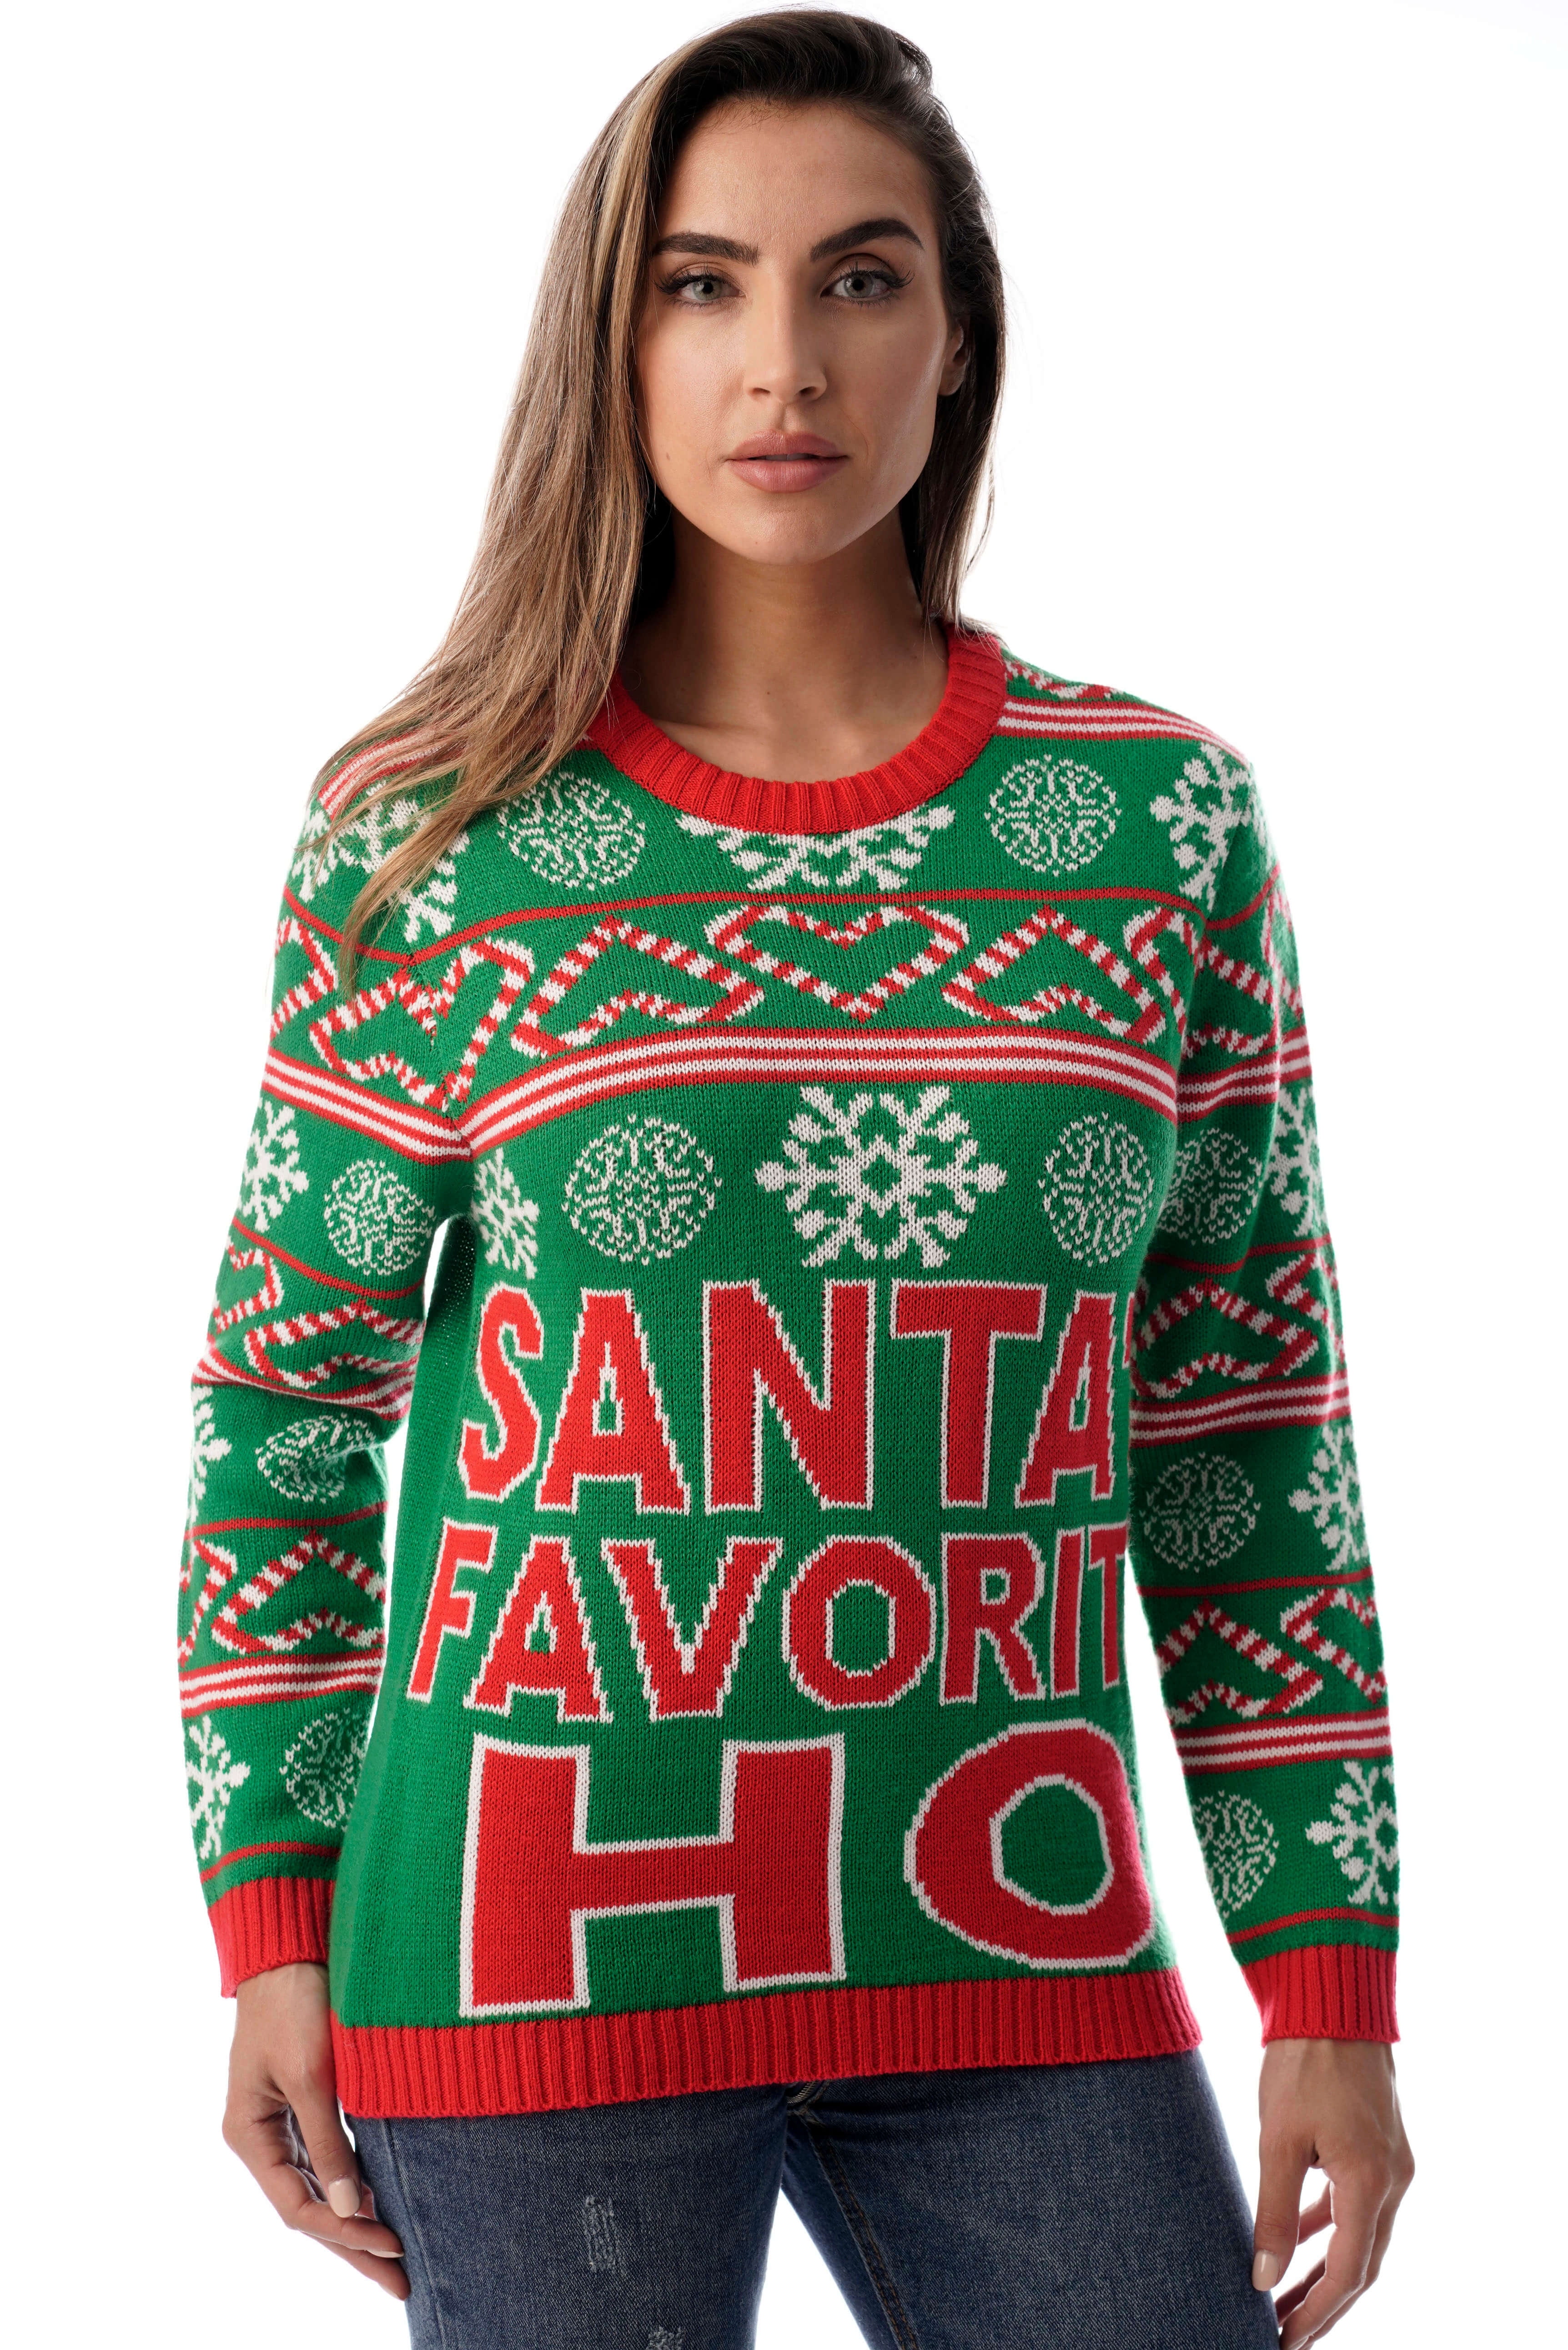 followme Womens Ugly Christmas Sweater Sweaters for Women (Green